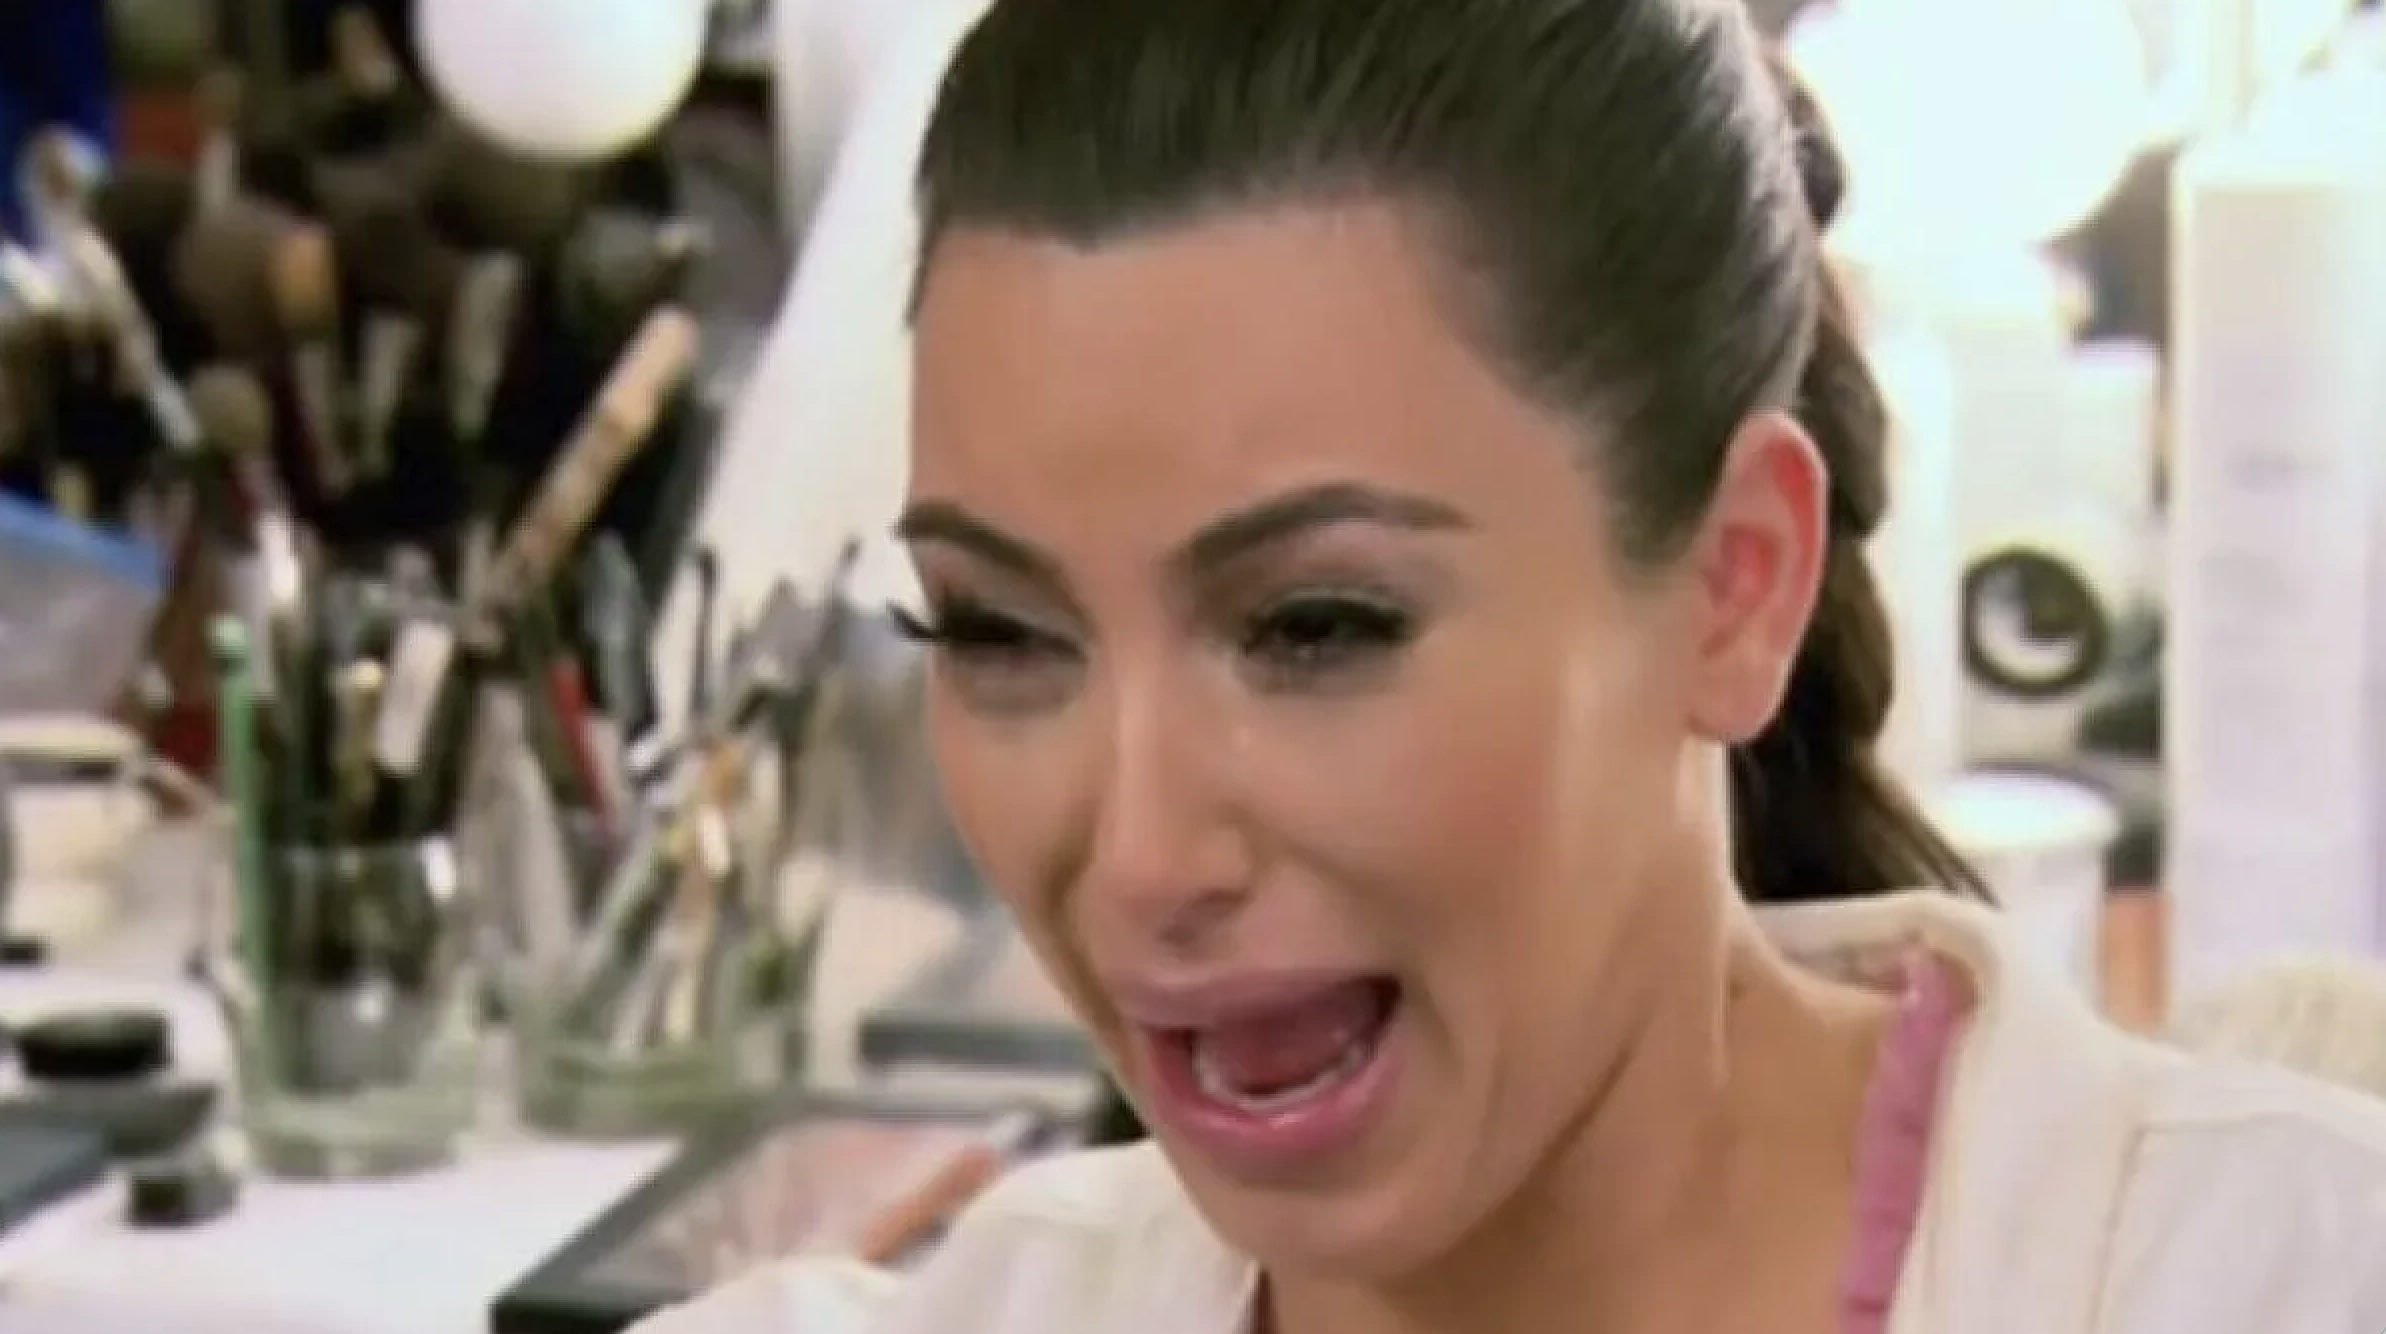 Kim also ugly-crying